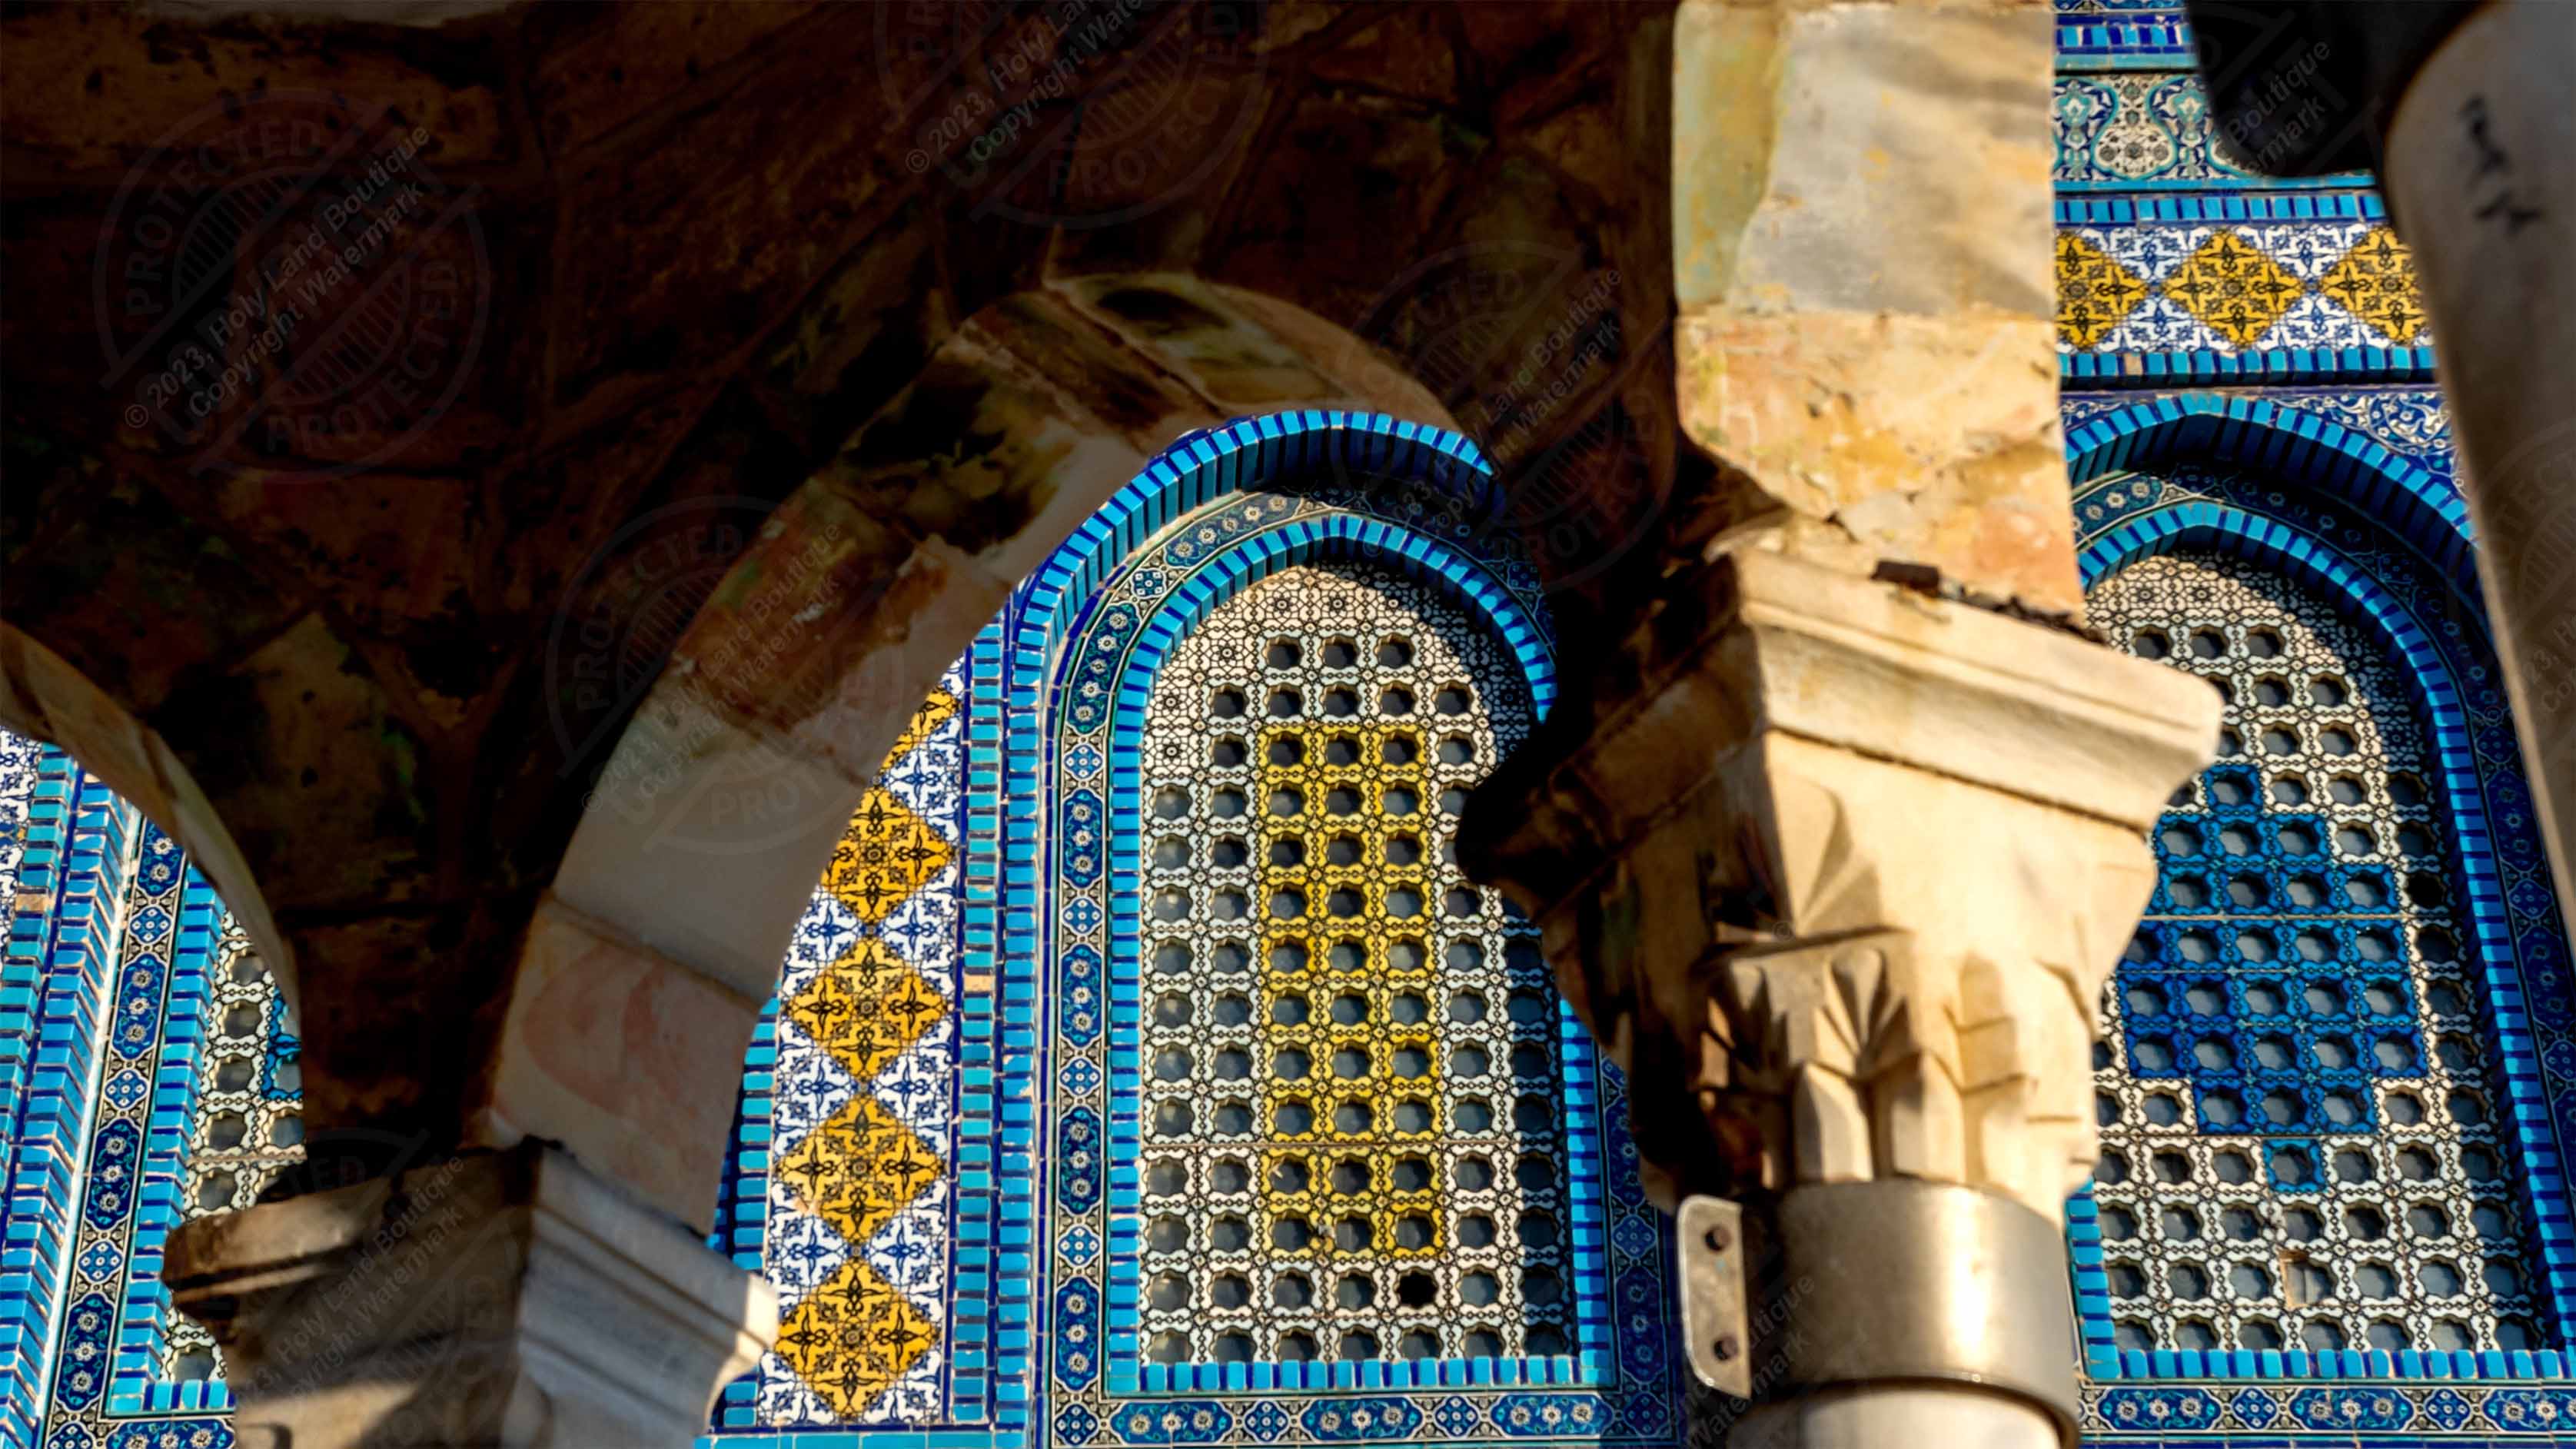 Dome Of The Rock Window